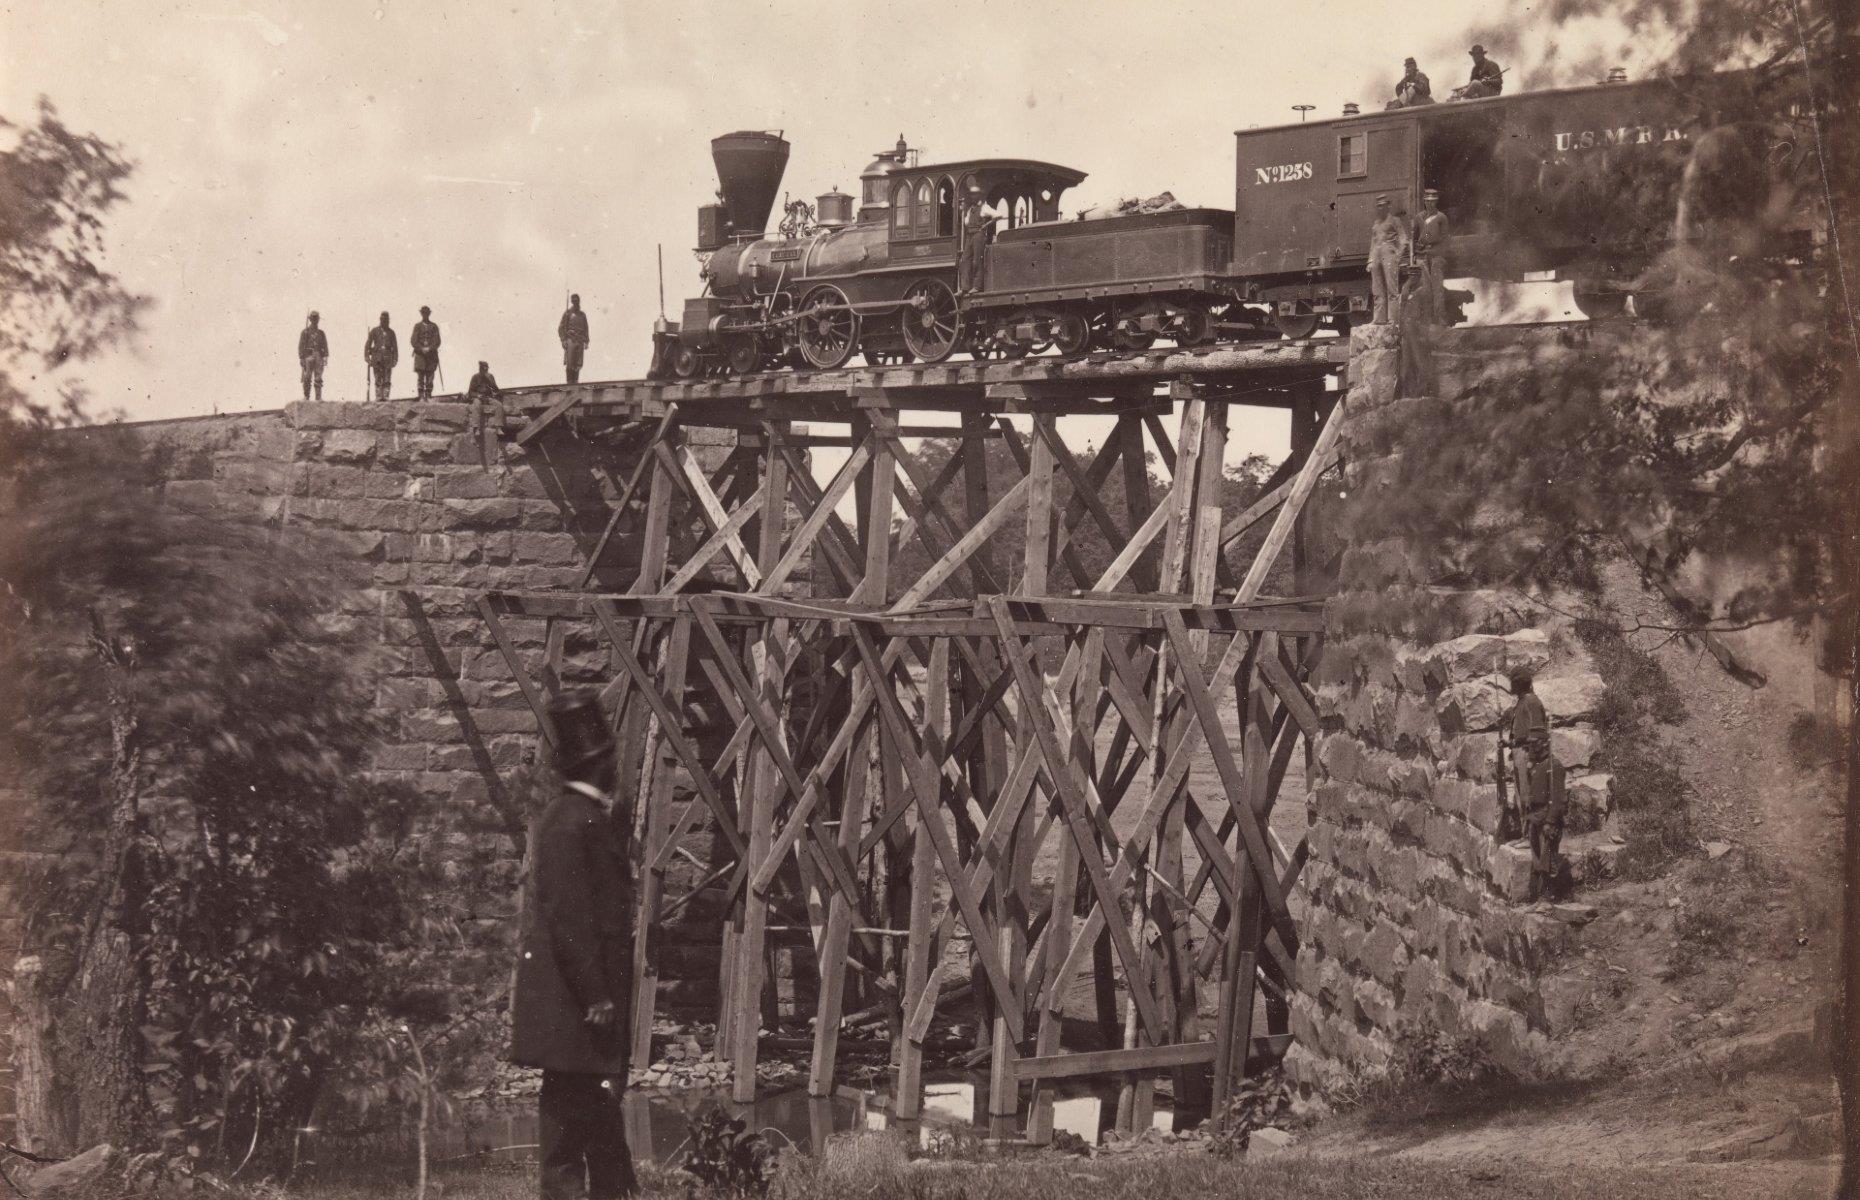 <p>By the end of the Civil War America's railways, like the rest of the nation, required reconstruction. The South was particularly badly affected, partly because Confederate saboteurs destroyed their own lines to try to halt the Union advance. Repairs were often hastily carried out by military engineers, as with this bridge on the Orange and Alexandria Railroad. Photographed in 1865, the bridge is just about being supported by a rudimentary-looking patch. Thanks to this sort of work, lines could sometimes be back up and running within hours of an enemy attack.</p>